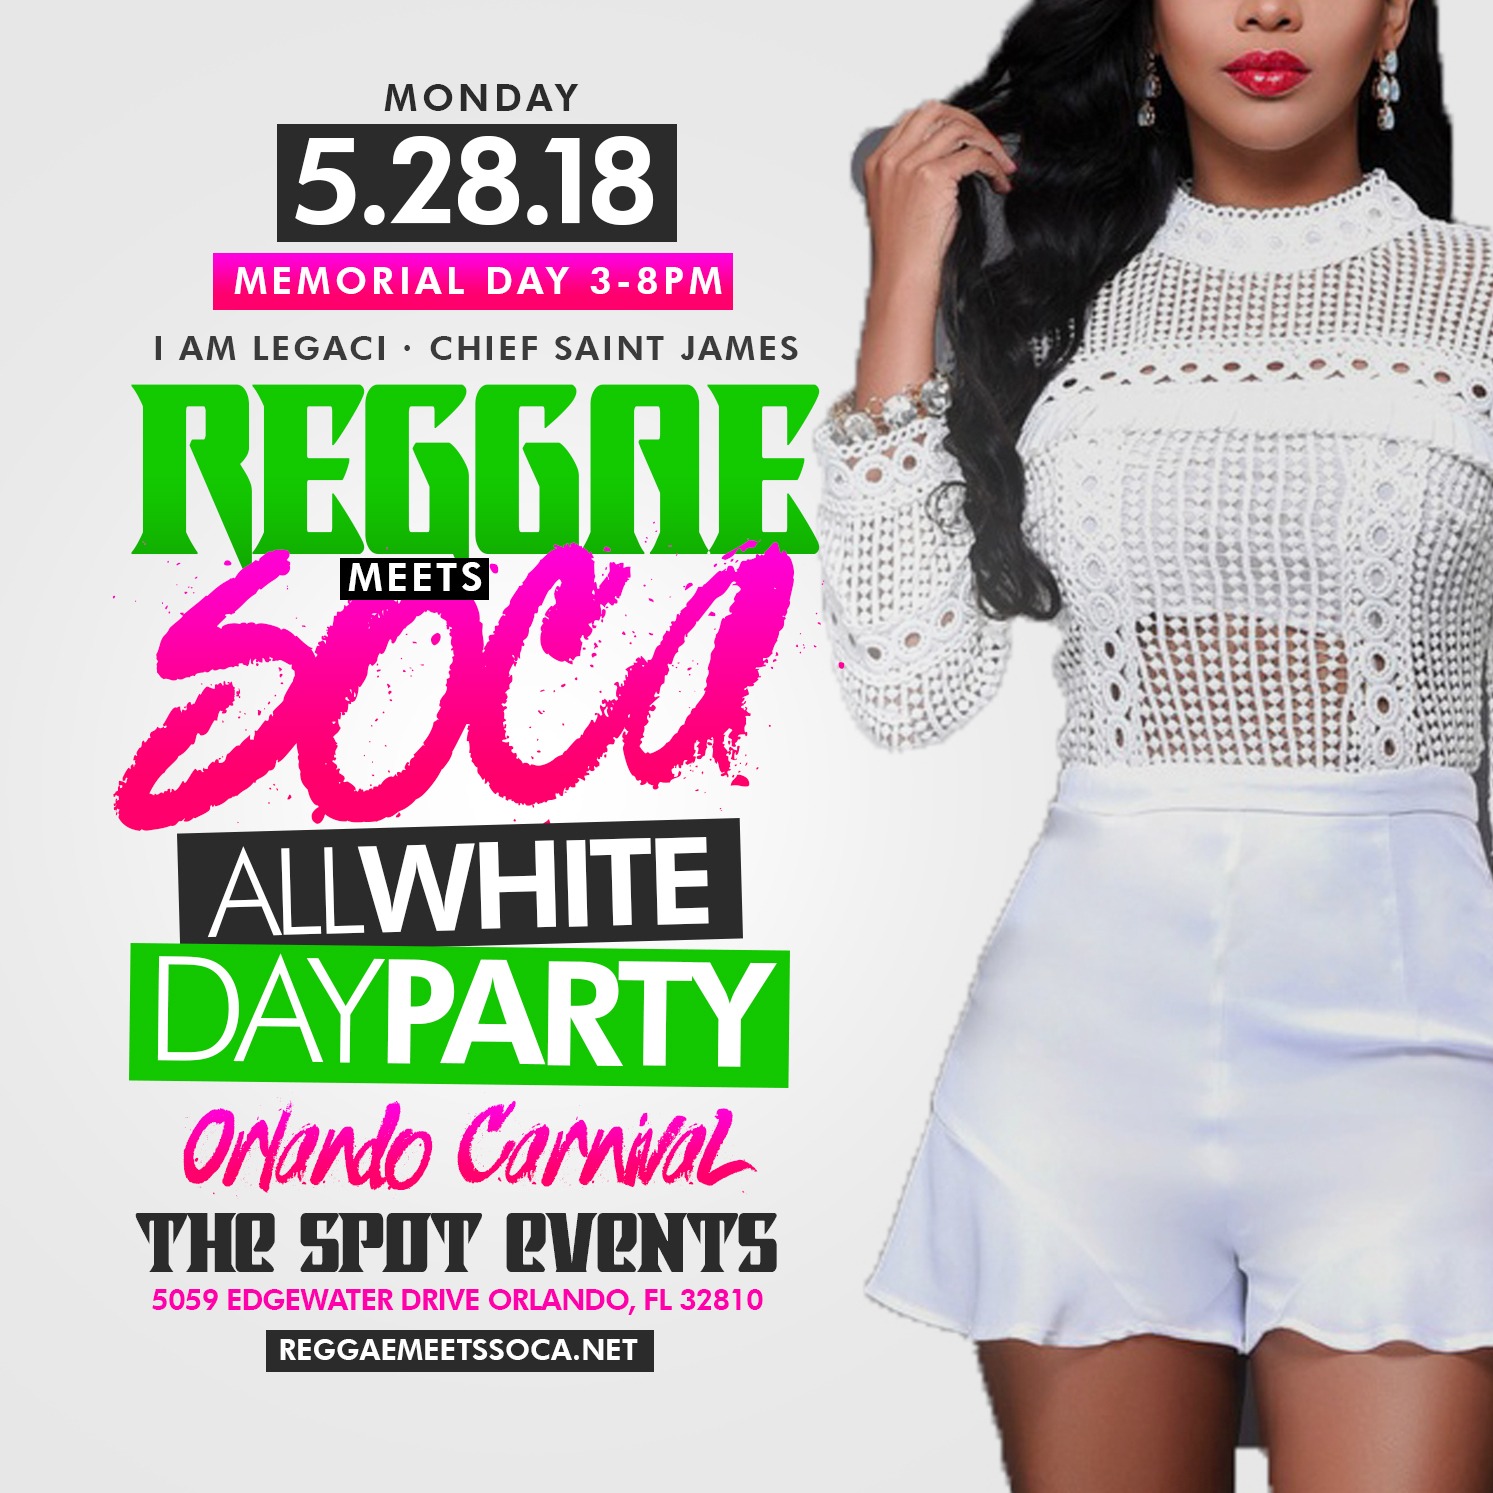 REGGAE MEETS SOCA The All White Day Party @ Orlando Carnival Memorial Day 2018